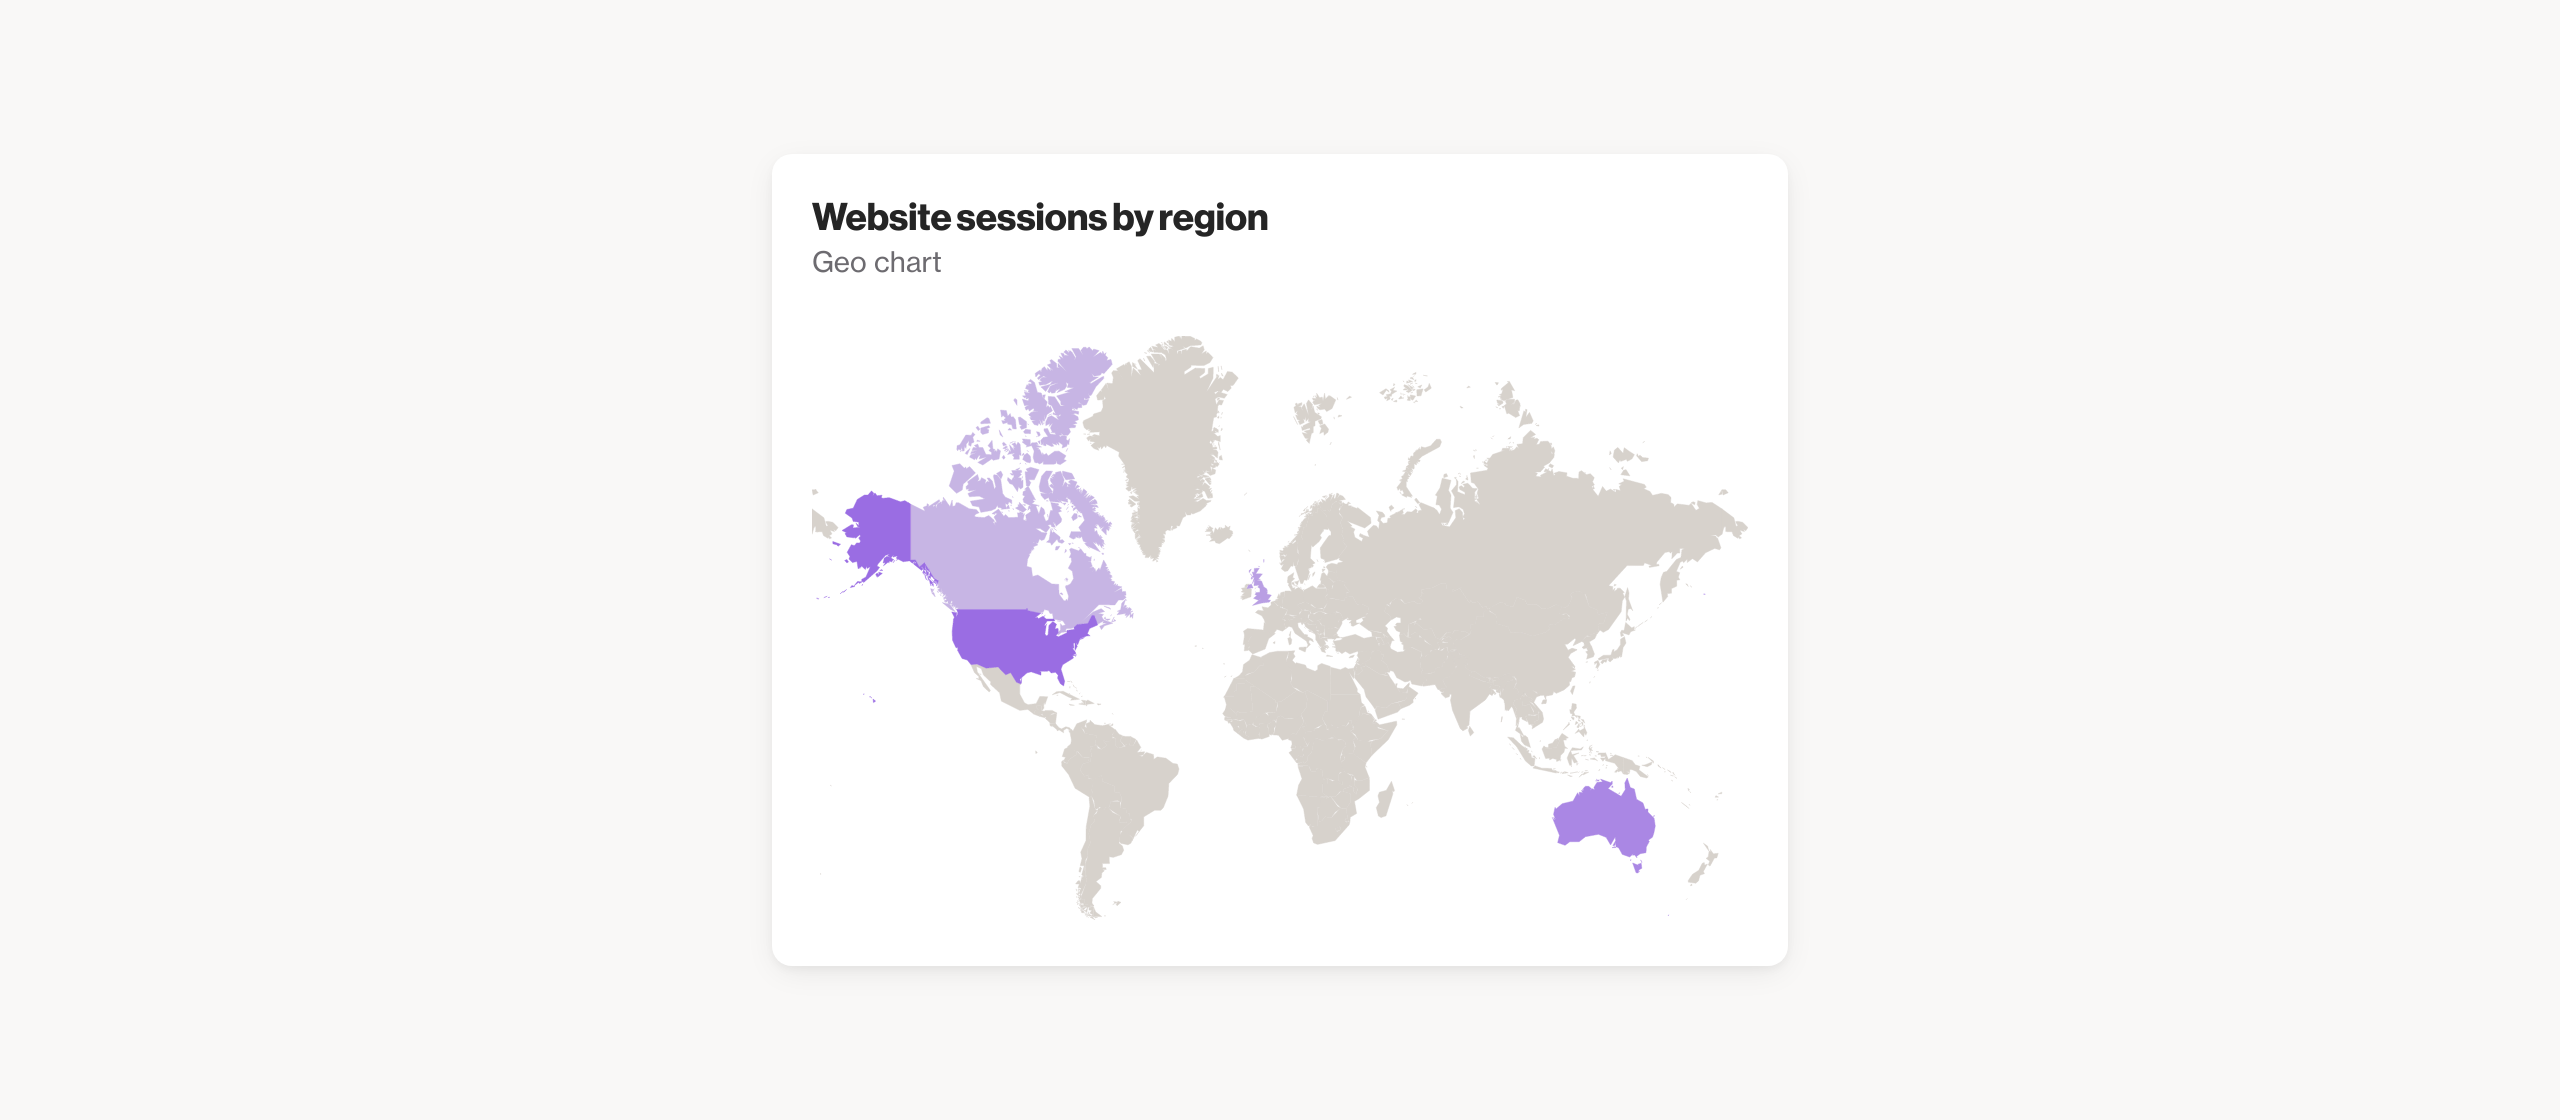 Website sessions by region